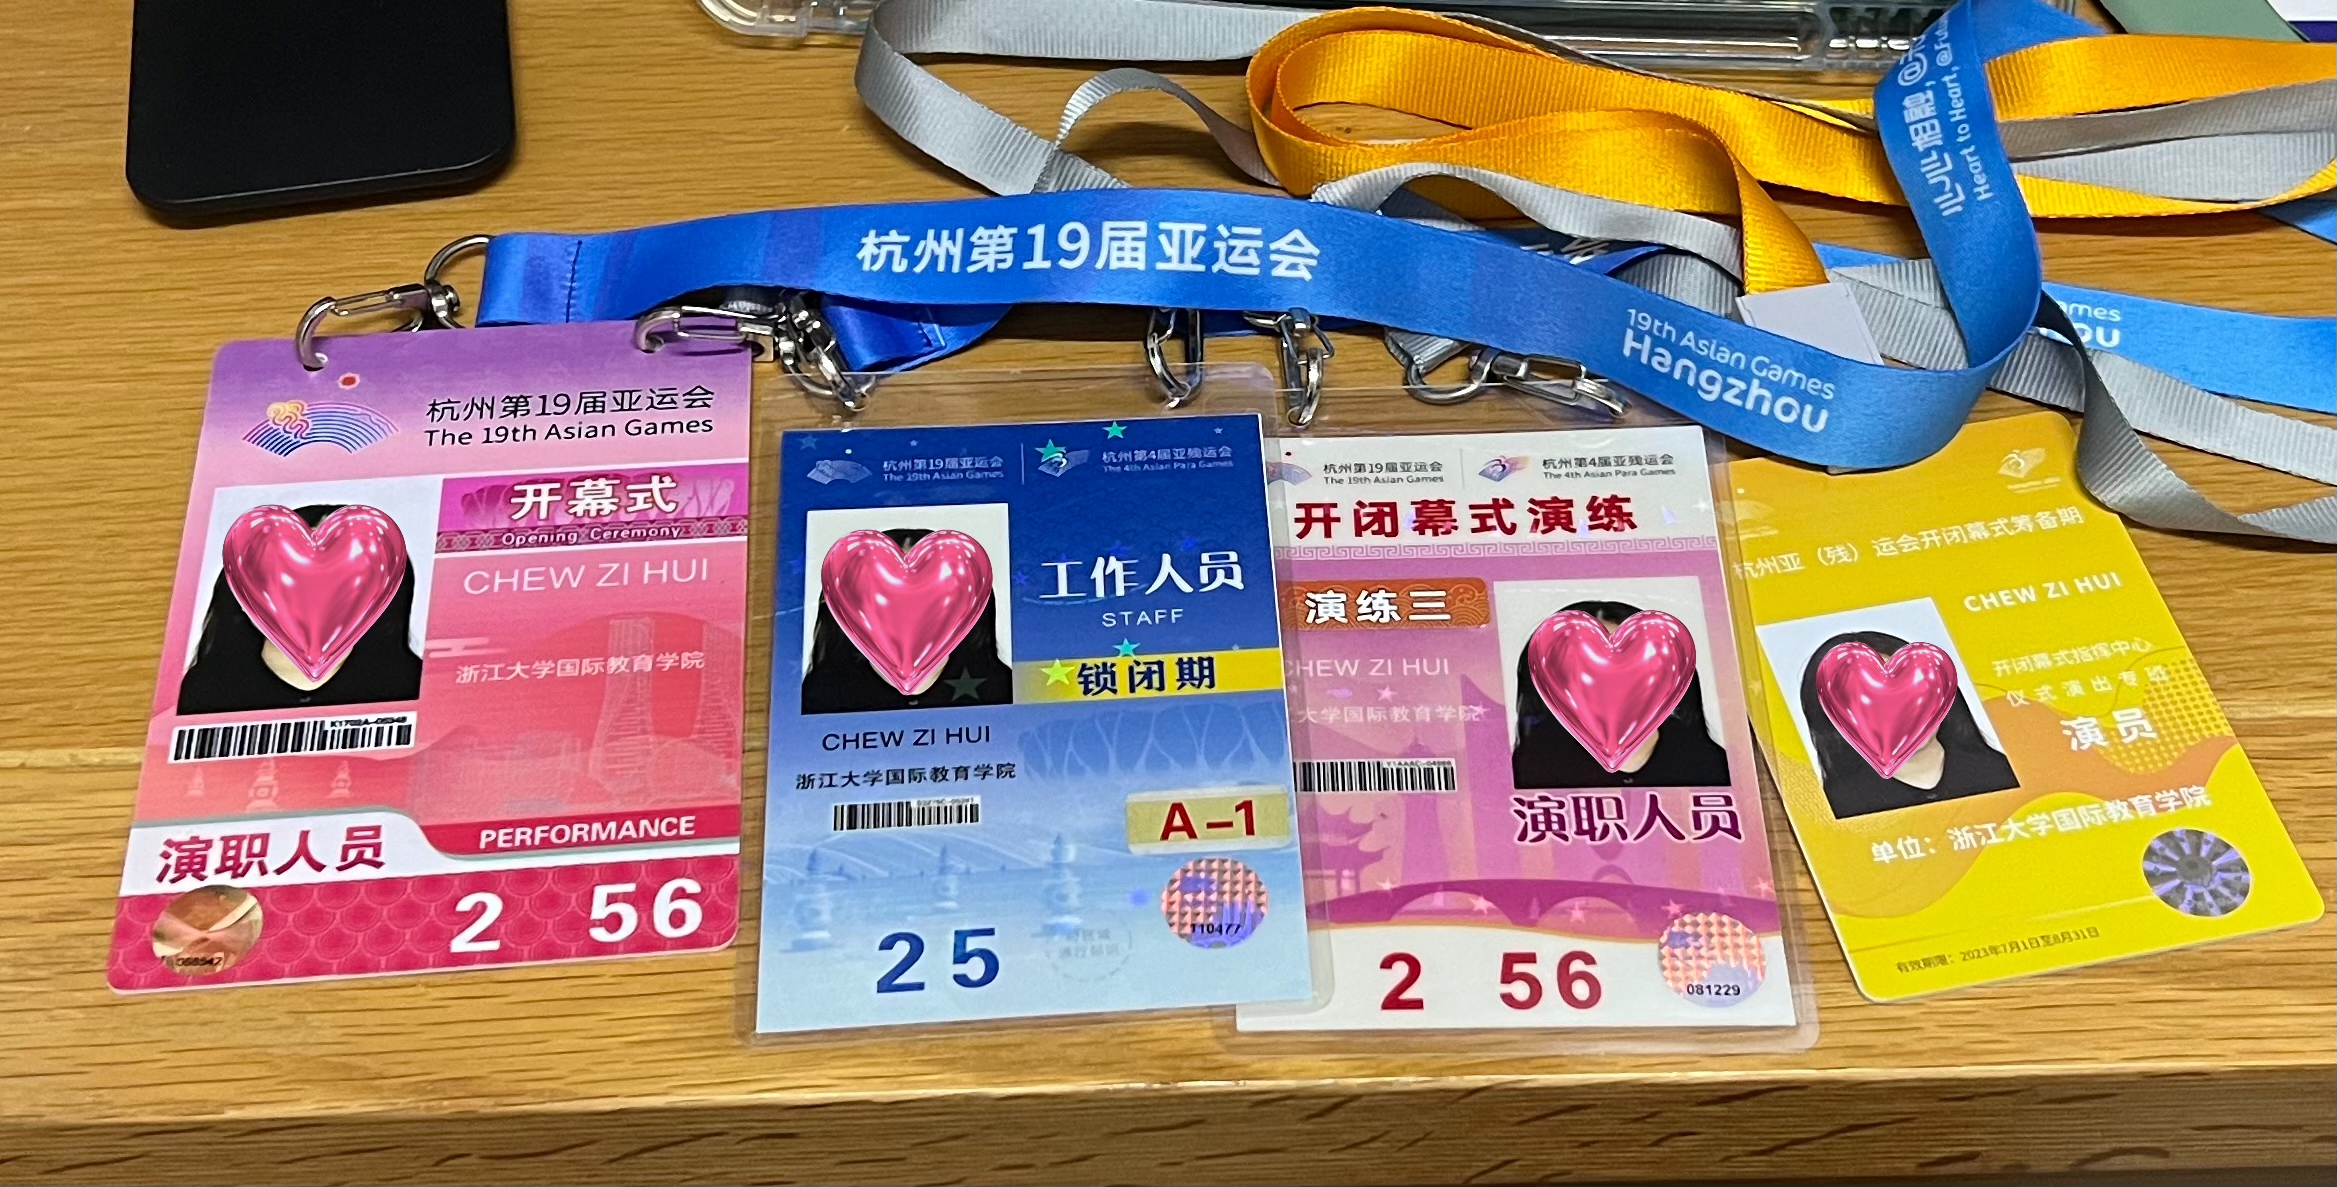 The access tag for the hangzhou asian games